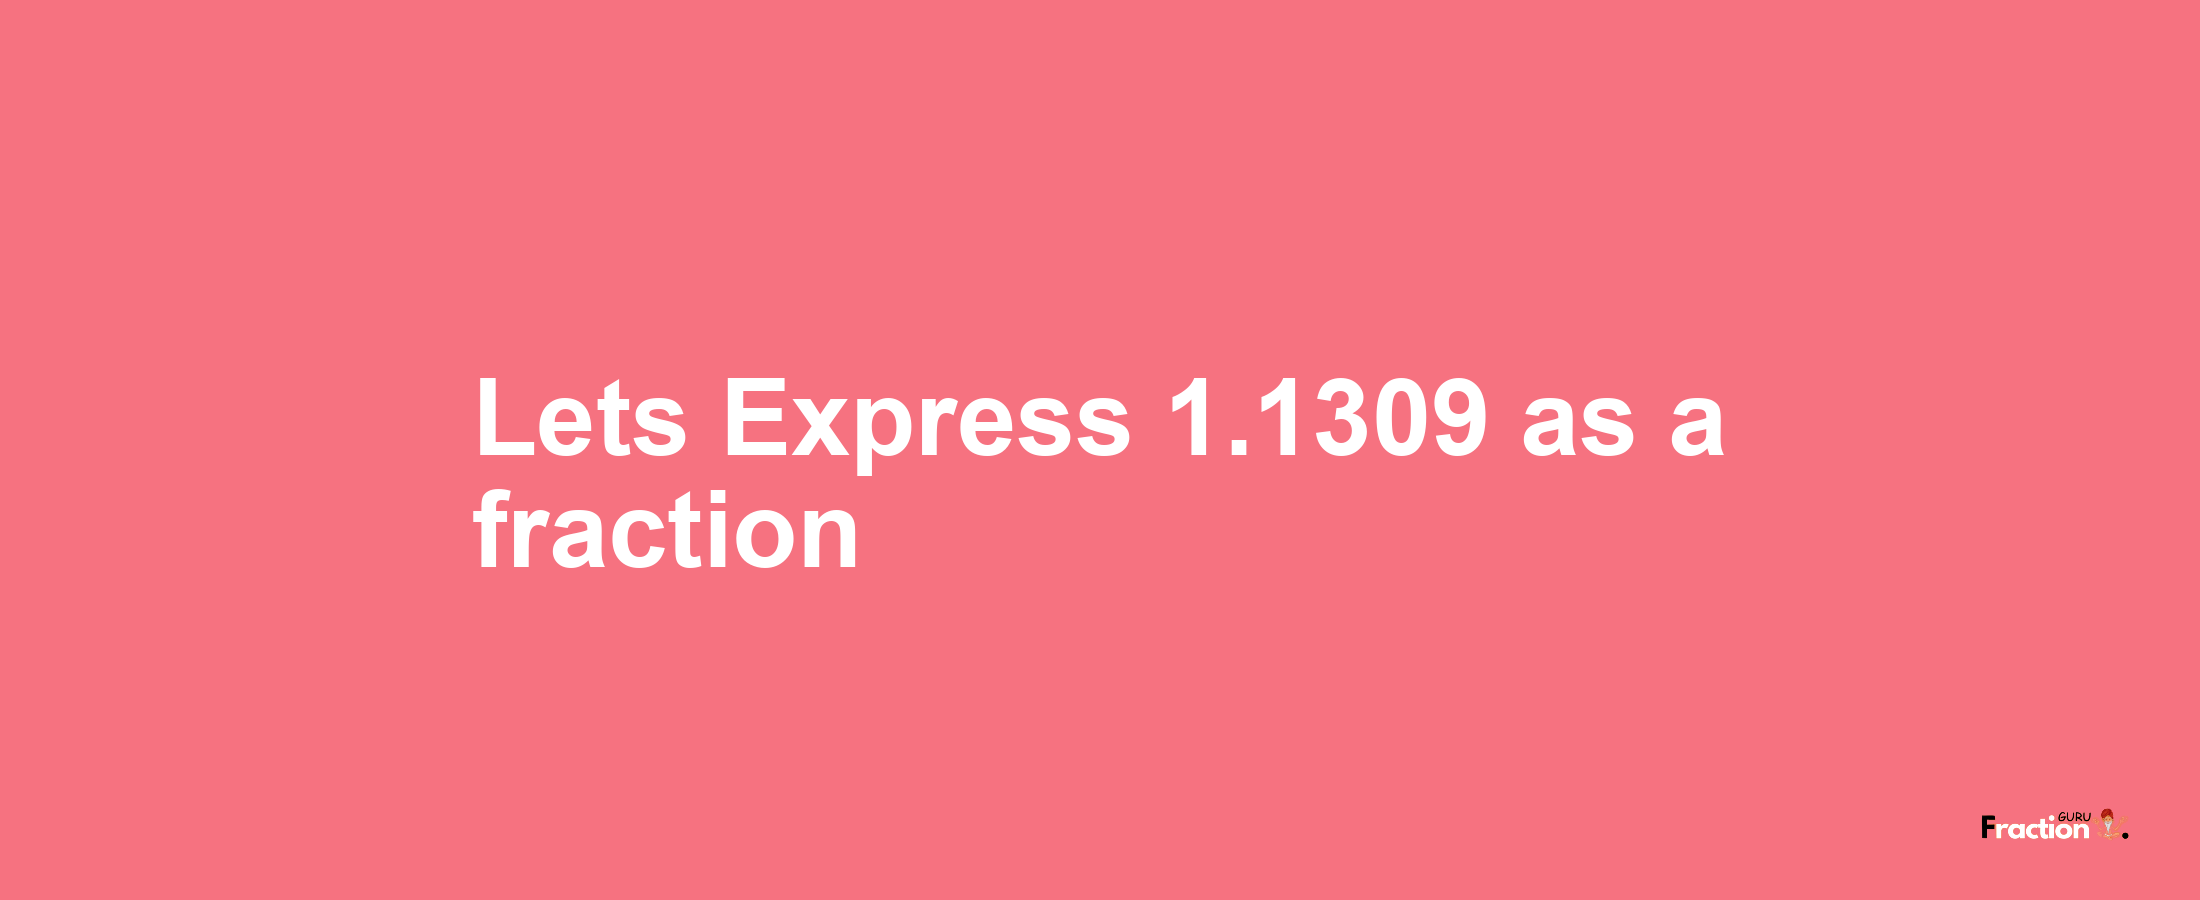 Lets Express 1.1309 as afraction